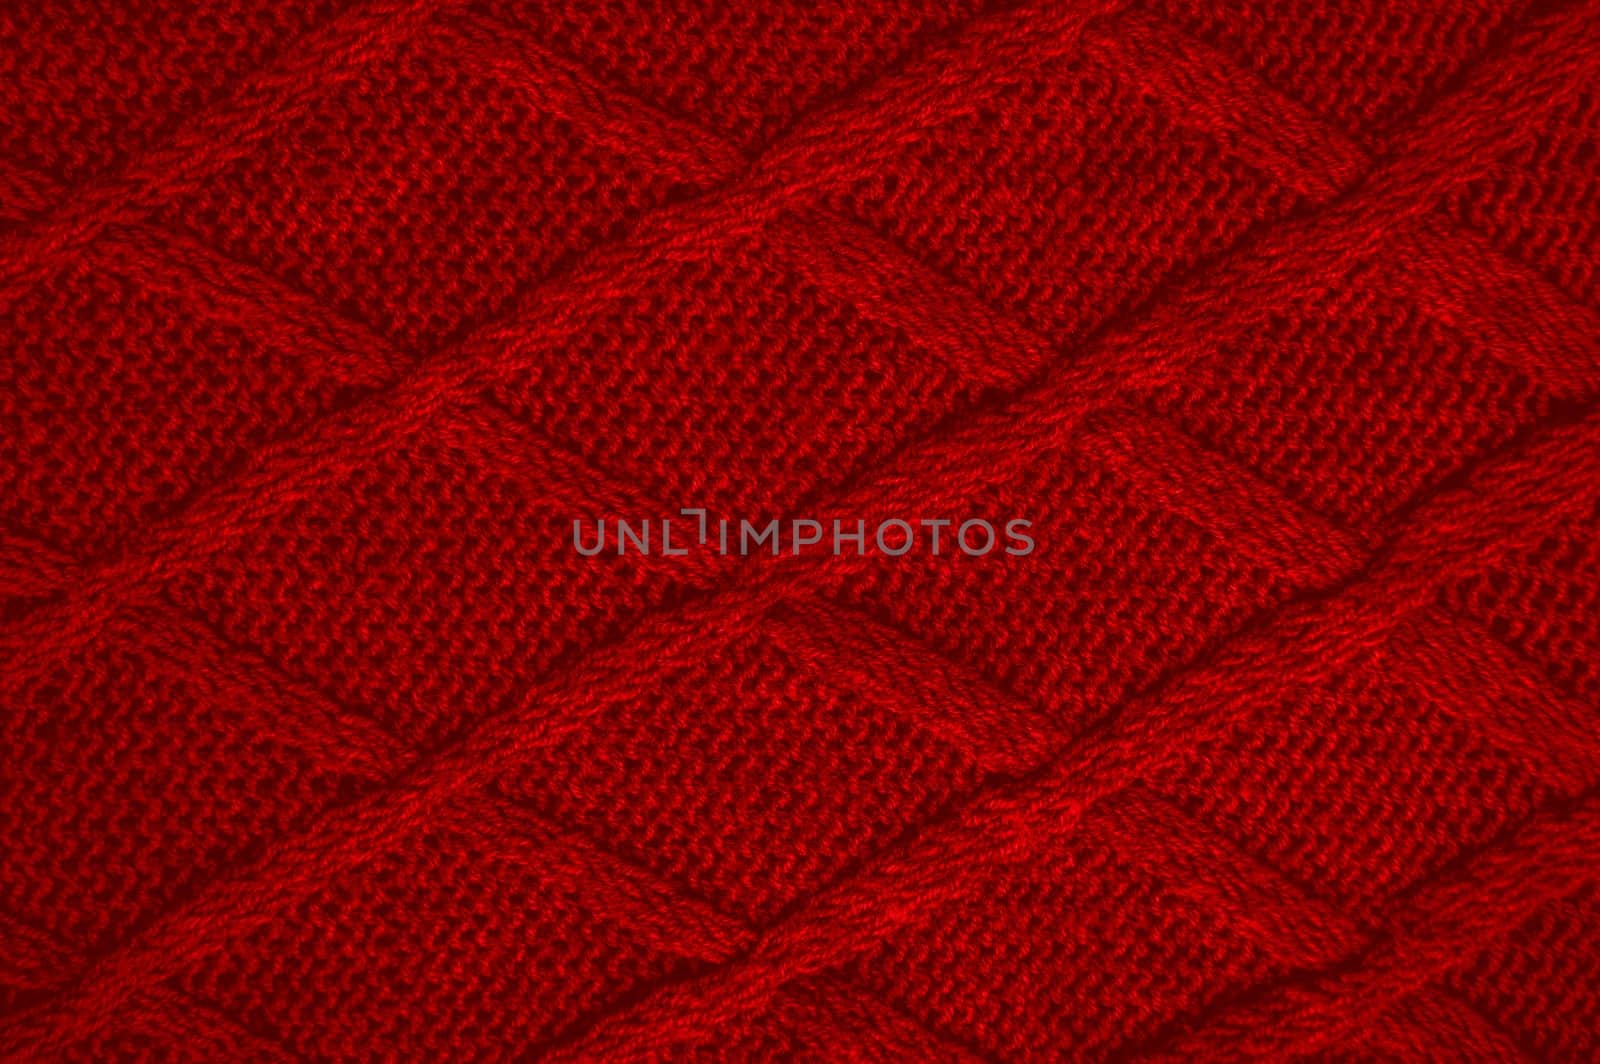 Abstract Wool. Organic Woven Sweater. Structure Handmade Holiday Background. Linen Knitted Wool. Red Closeup Thread. Nordic Winter Canvas. Detail Cloth Garment. Soft Knitted Fabric.